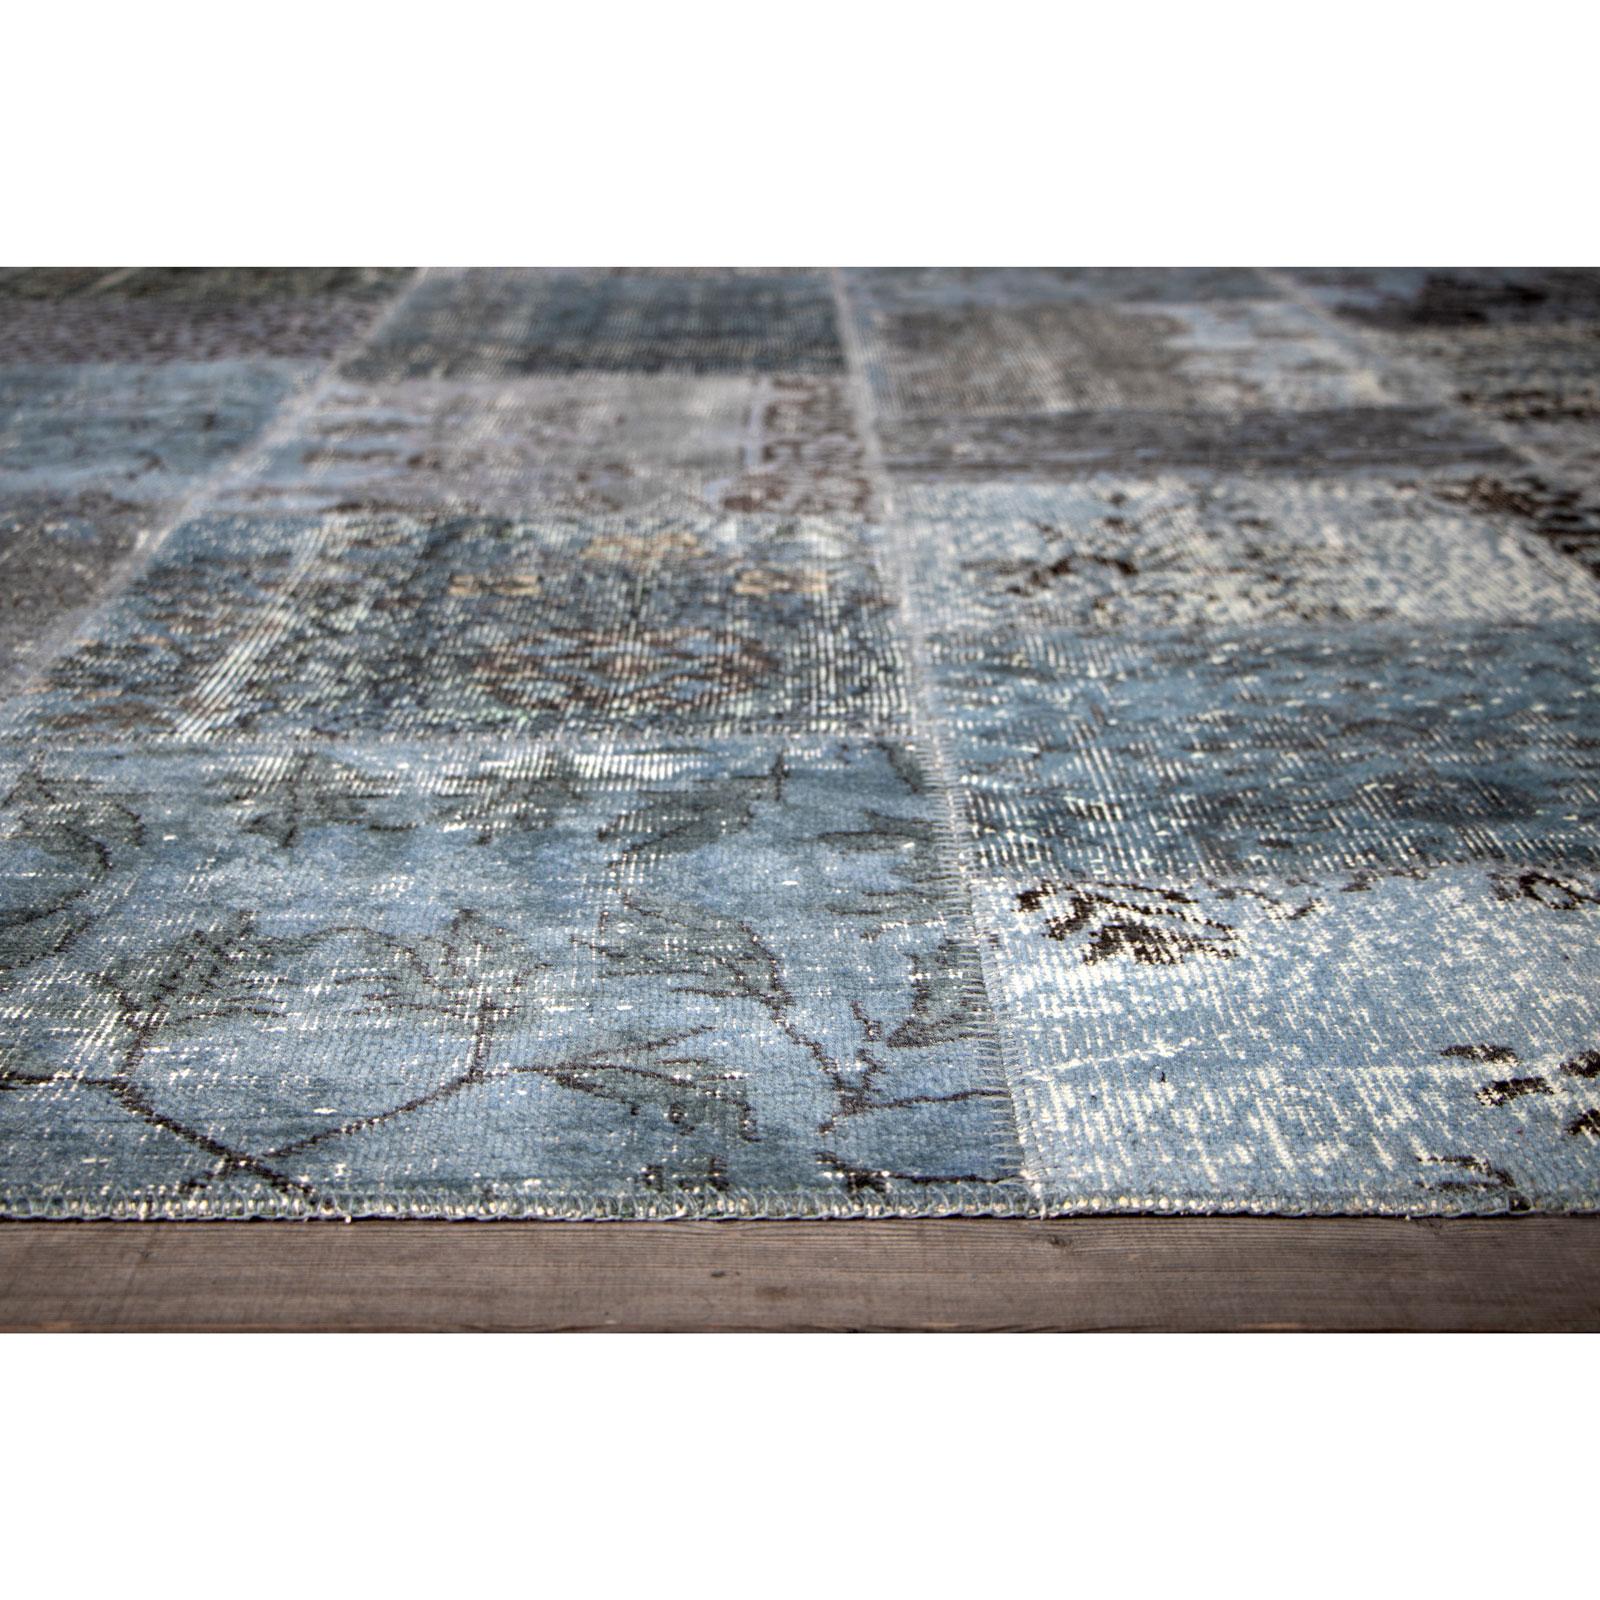 Modern Antique Chic Vintage Blue Brown Wool Cotton Rug by Deanna Comellini 250x350 cm For Sale